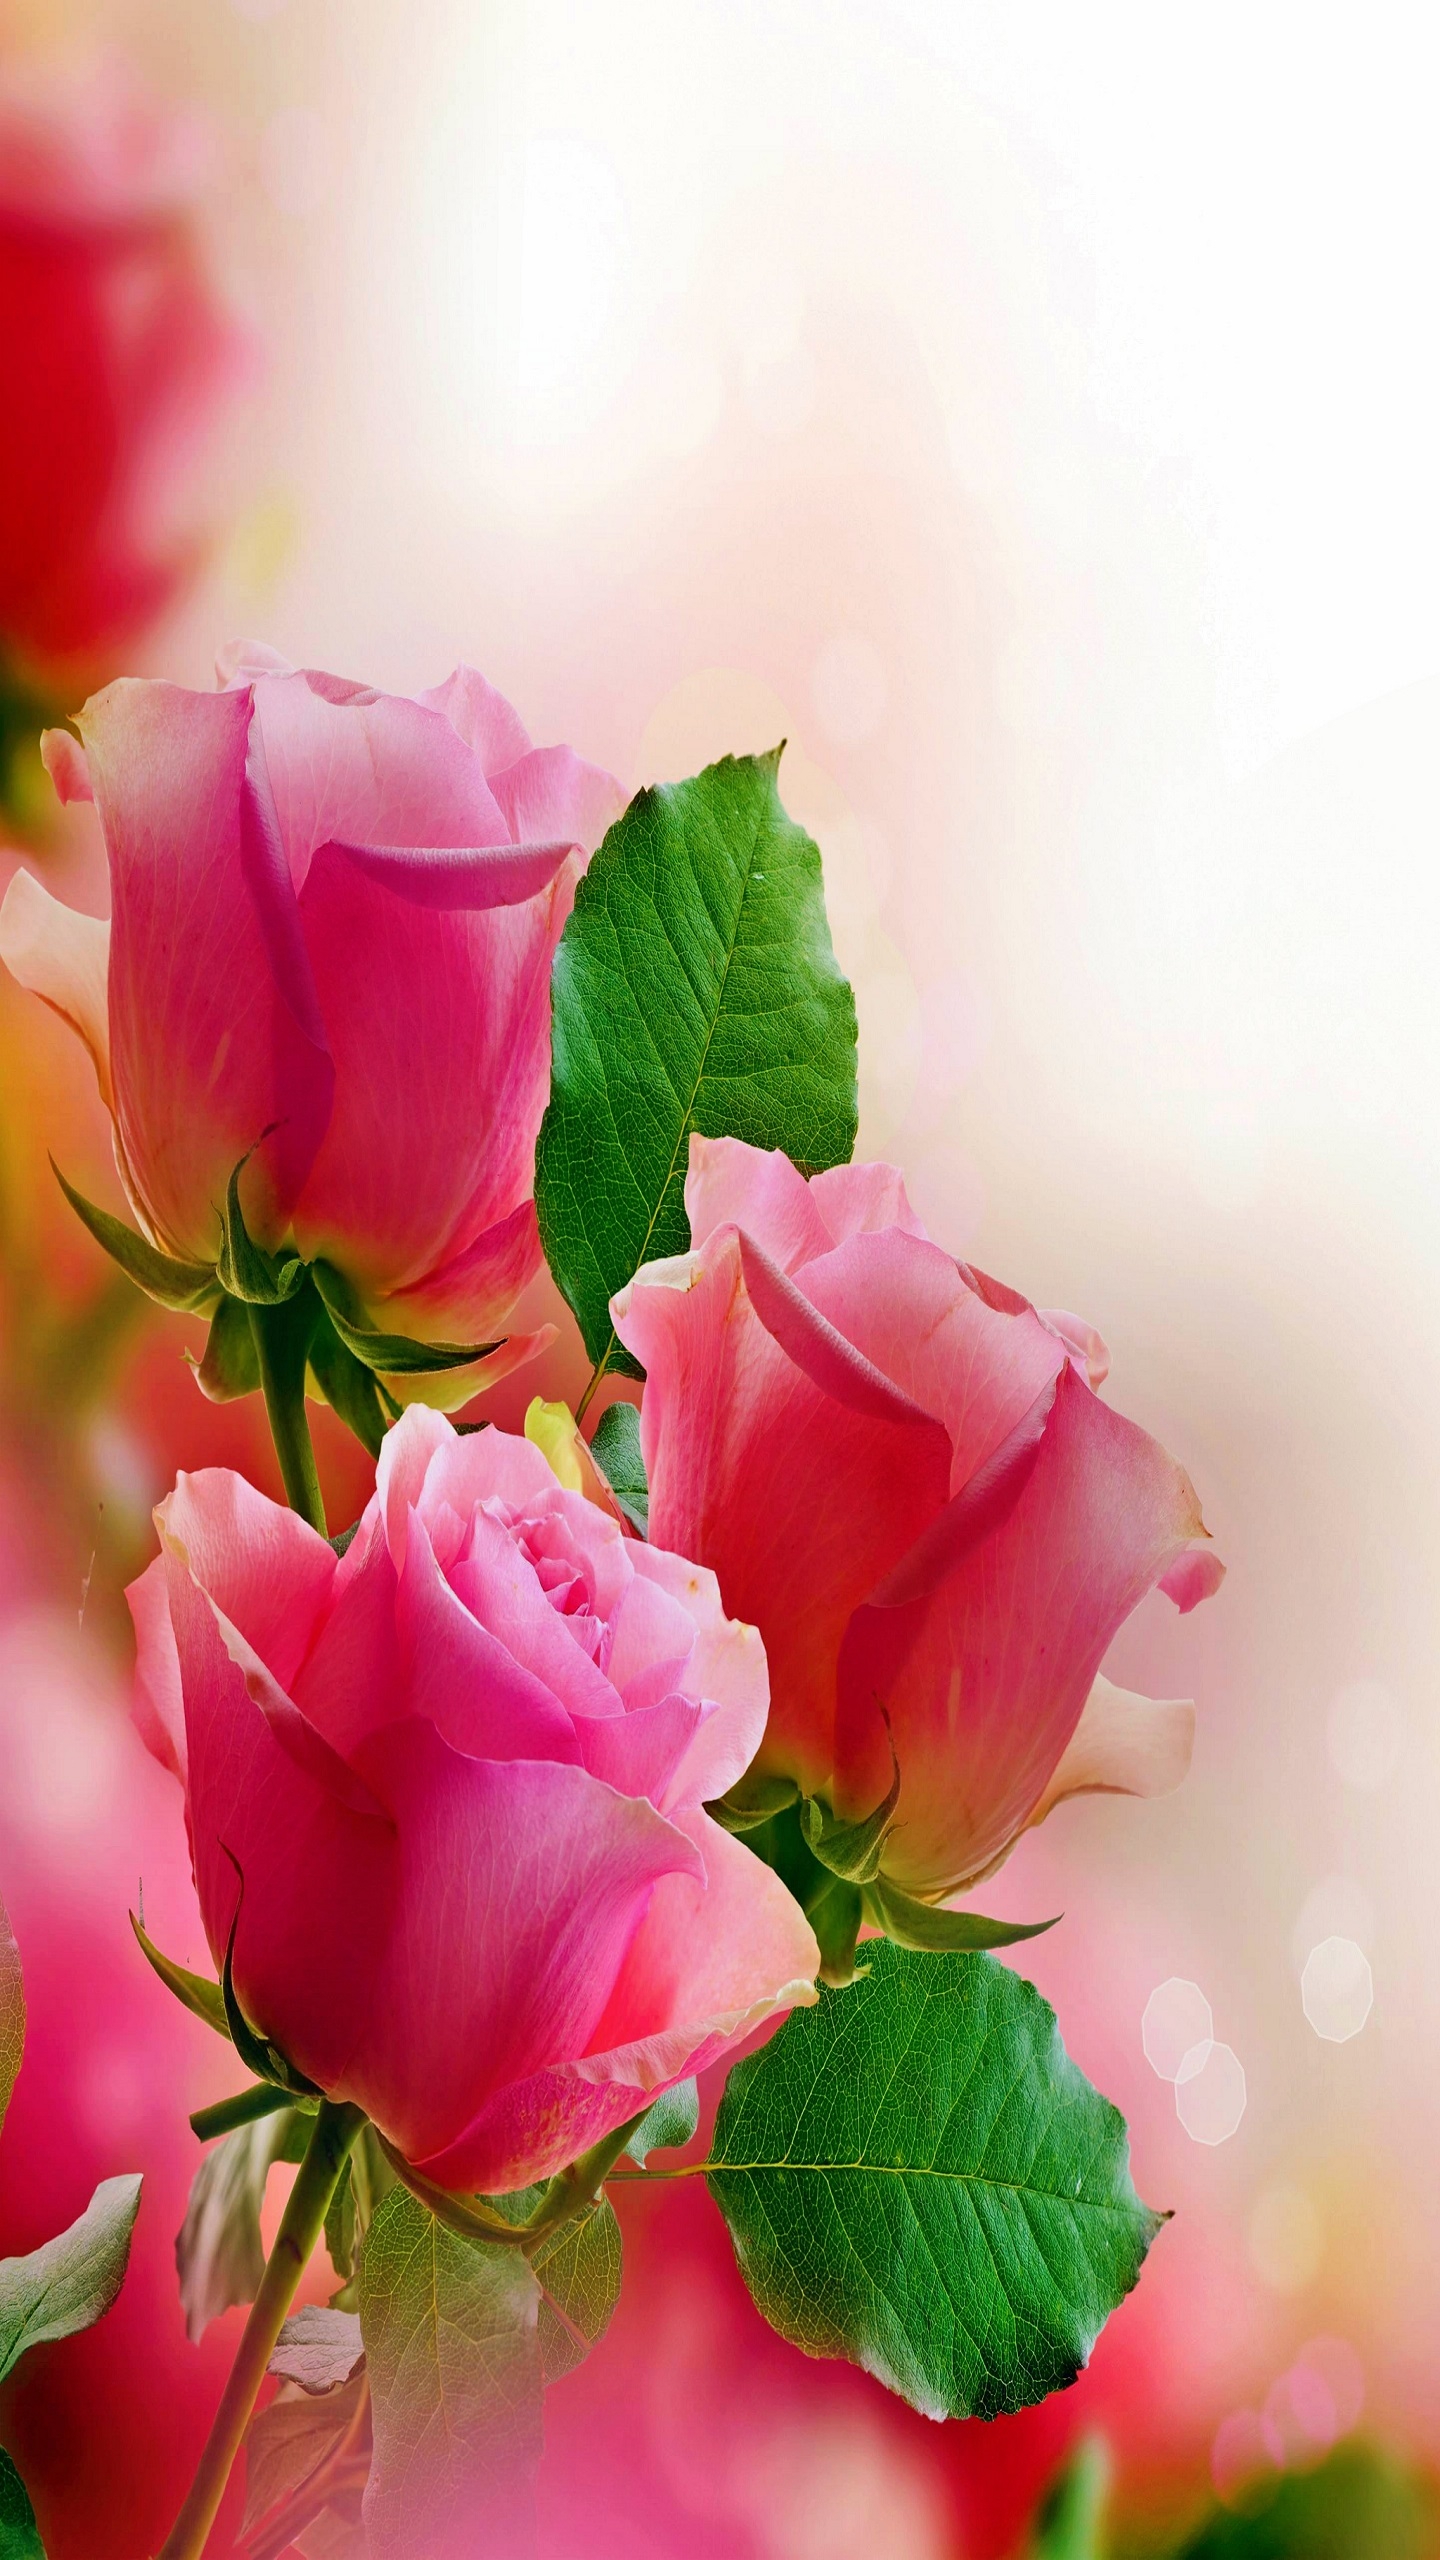 Pink Roses for Samsung S7 & S7 Edge resolution